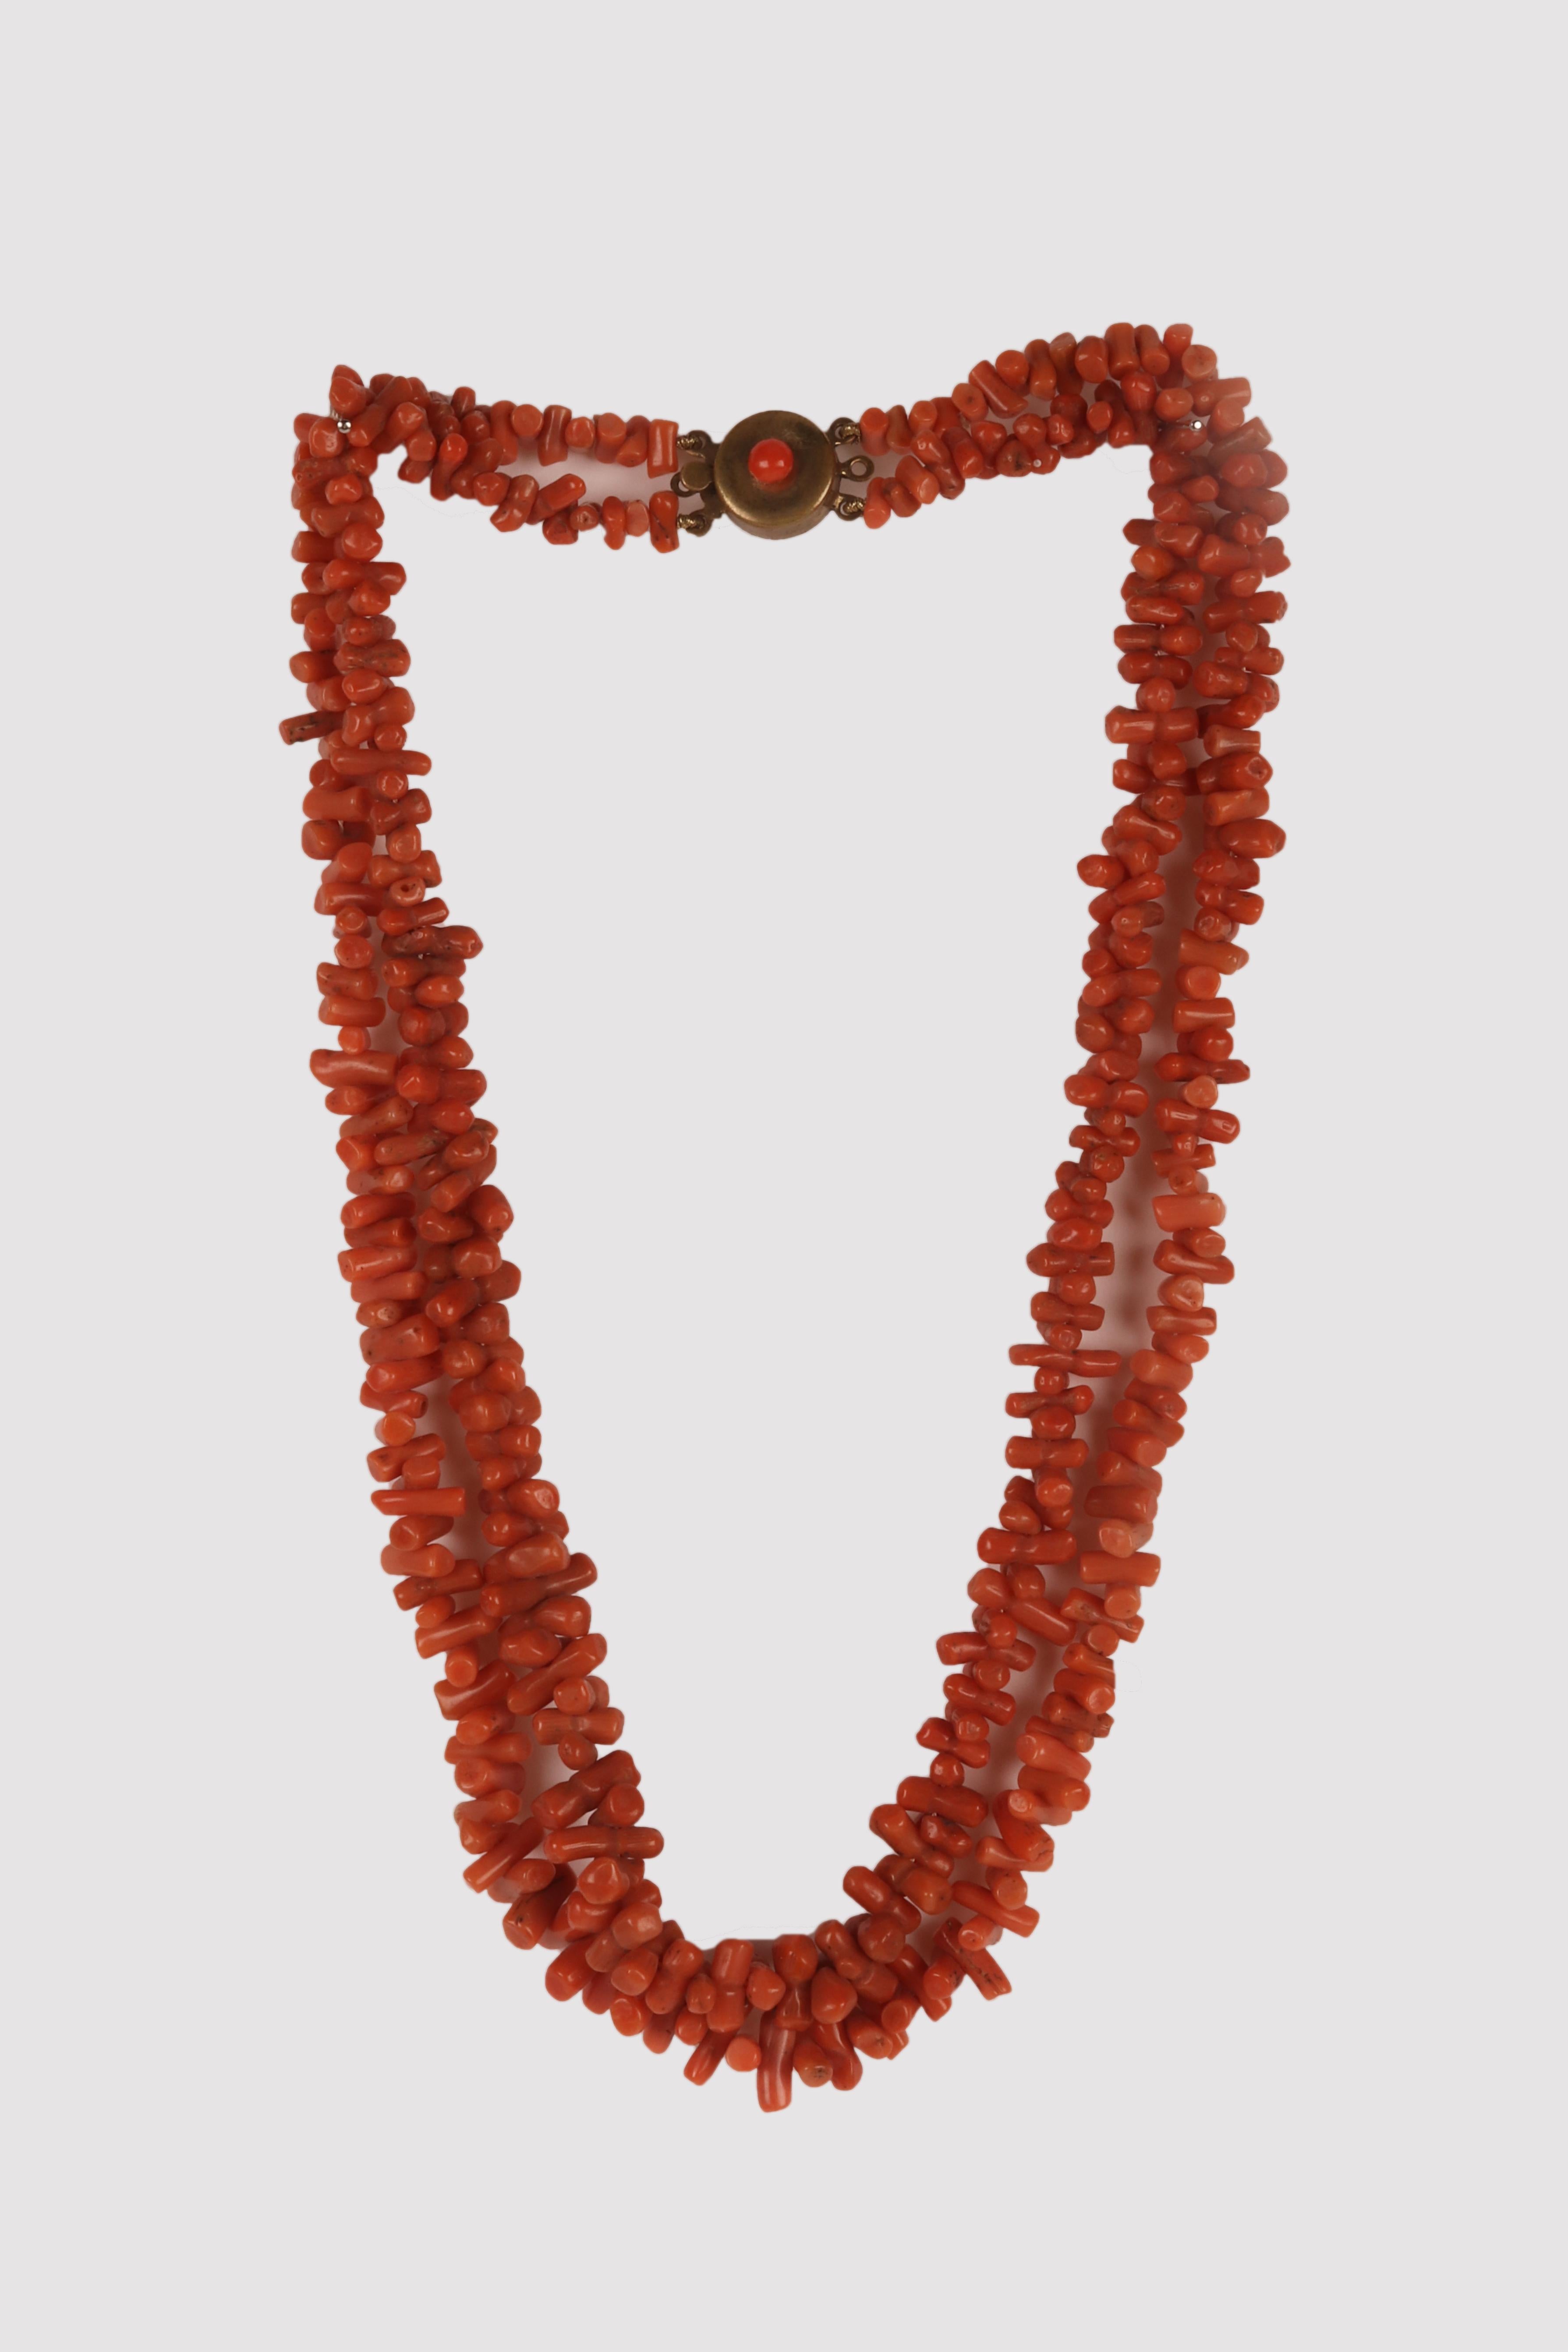 English Sciacca coral necklace, England end of 19th century. For Sale